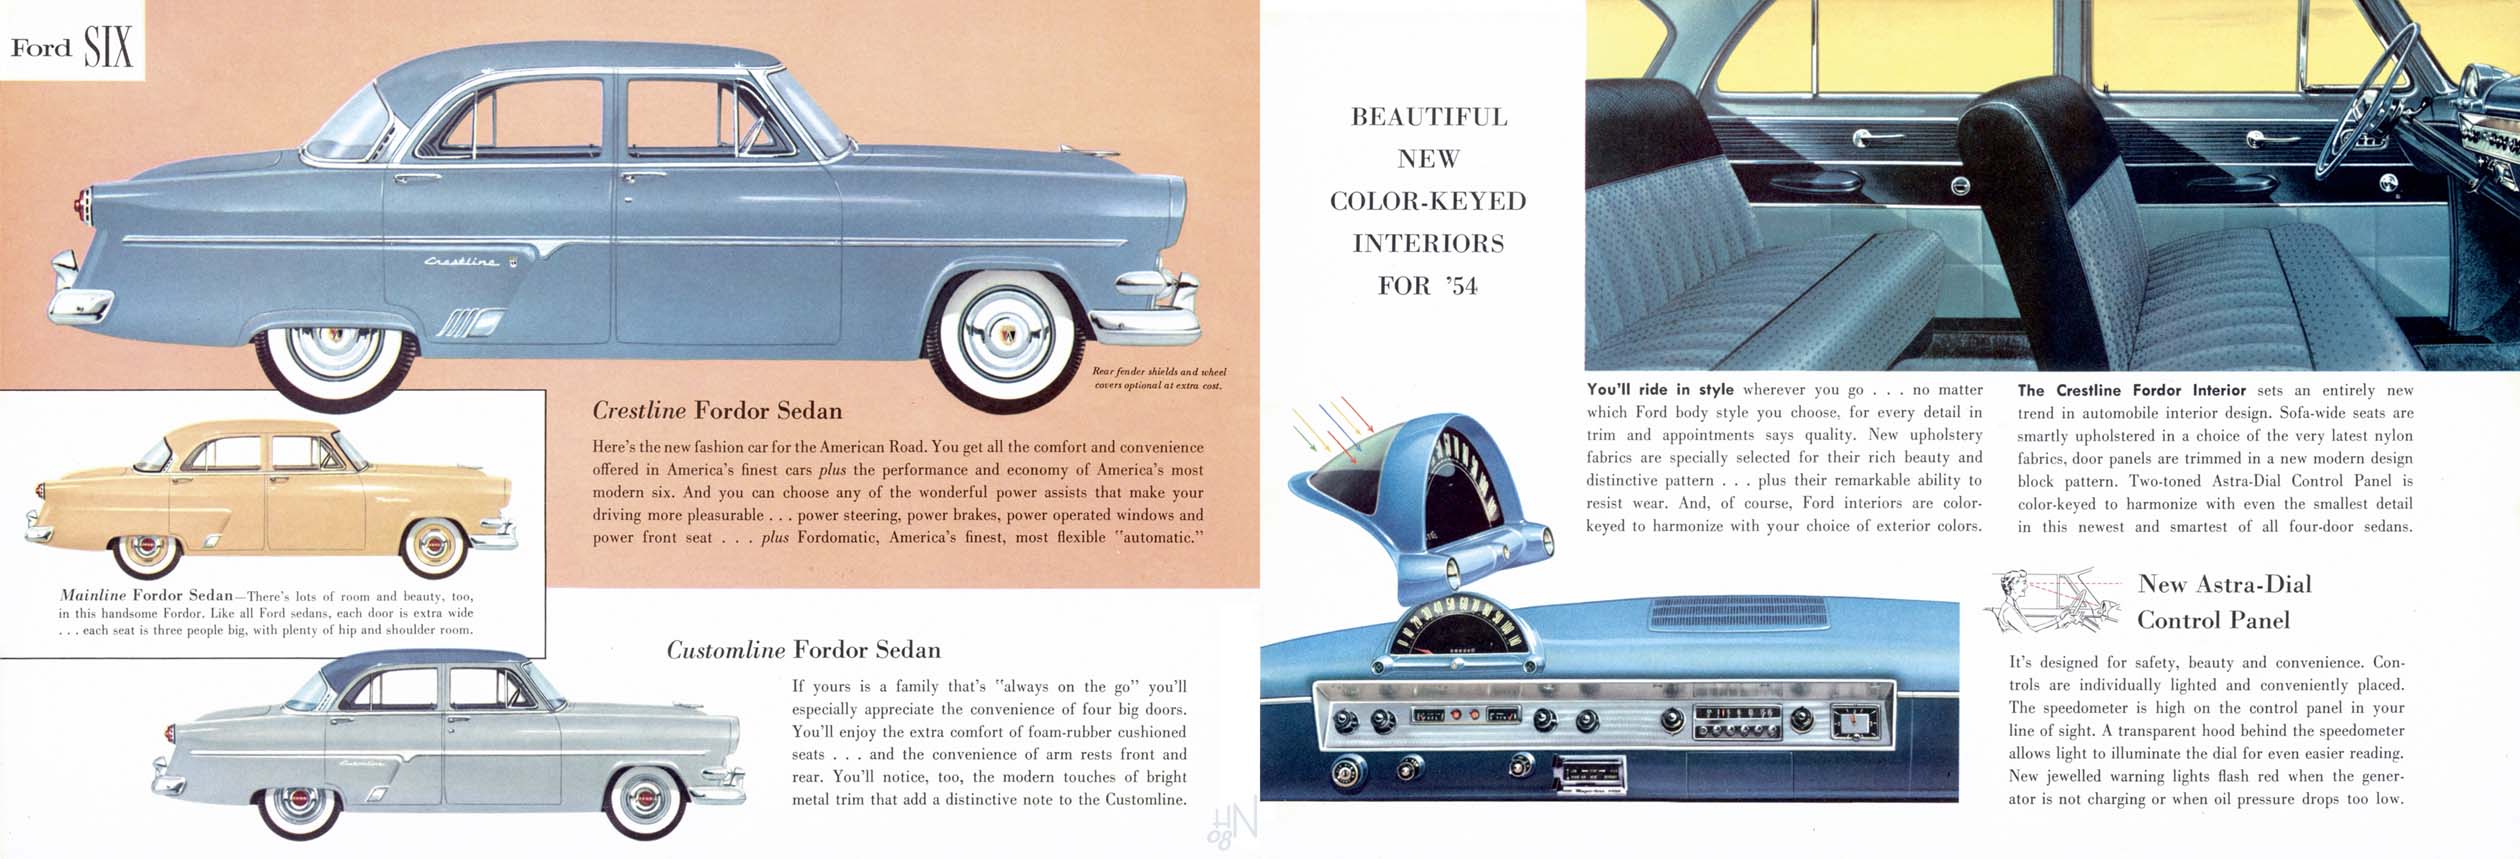 1954 Ford Six Brochure Page 4